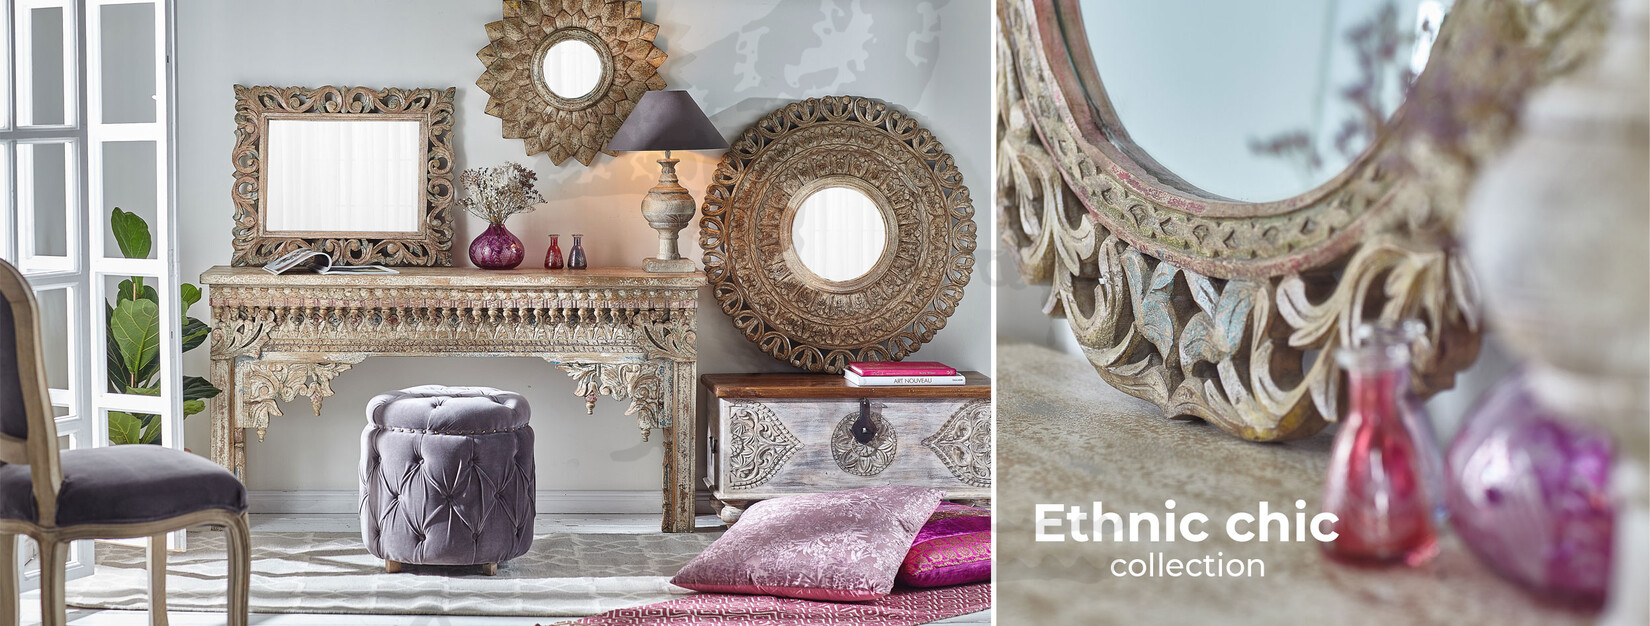 Ethnic chic collection